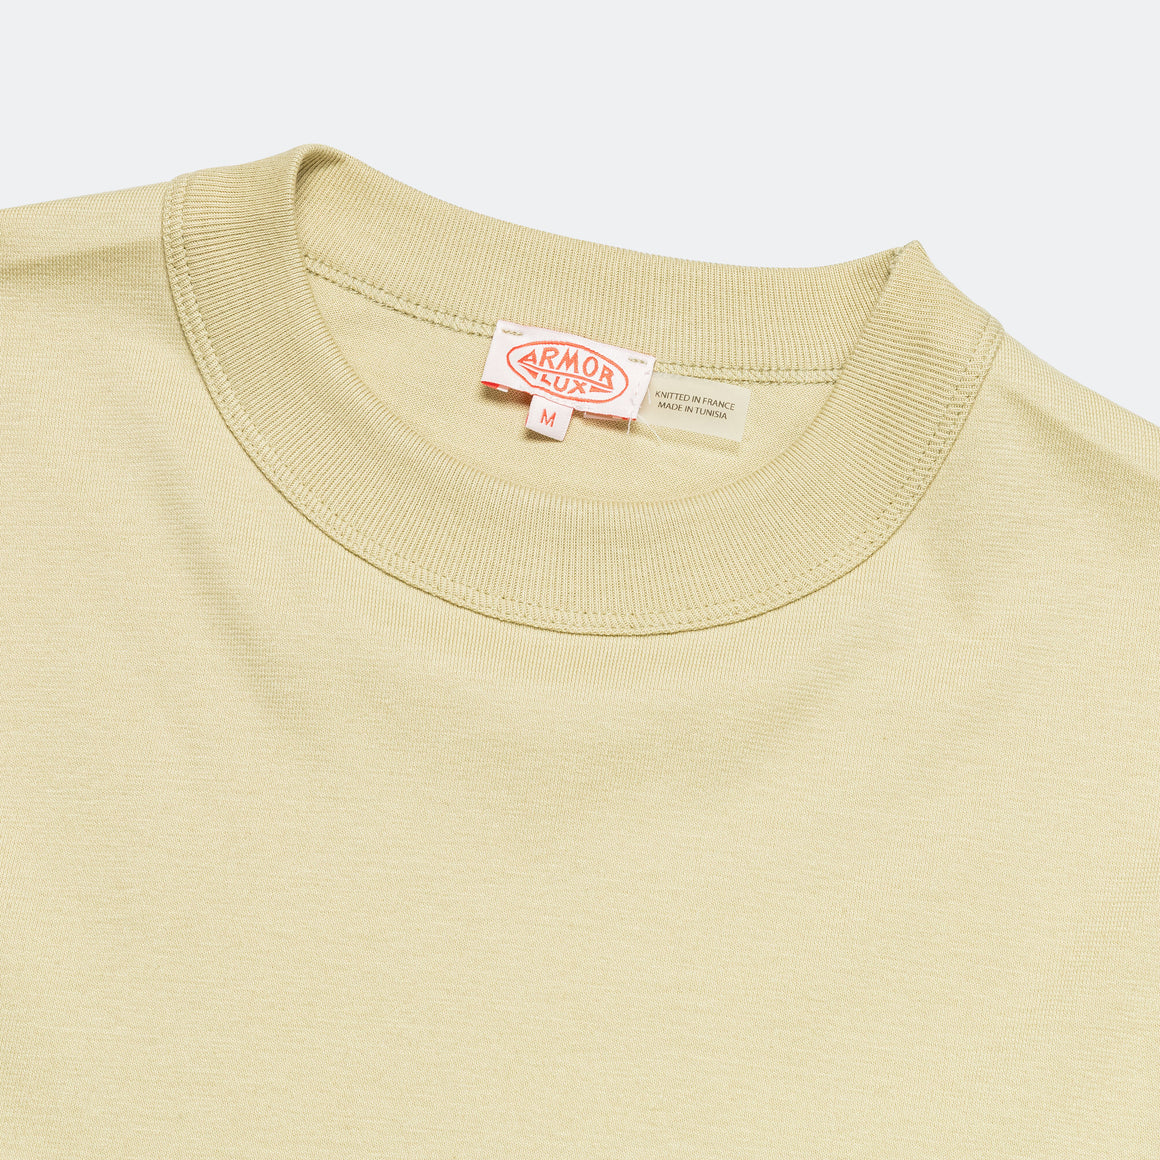 Armor Lux - Heritage T-Shirt - Pale Olive - UP THERE